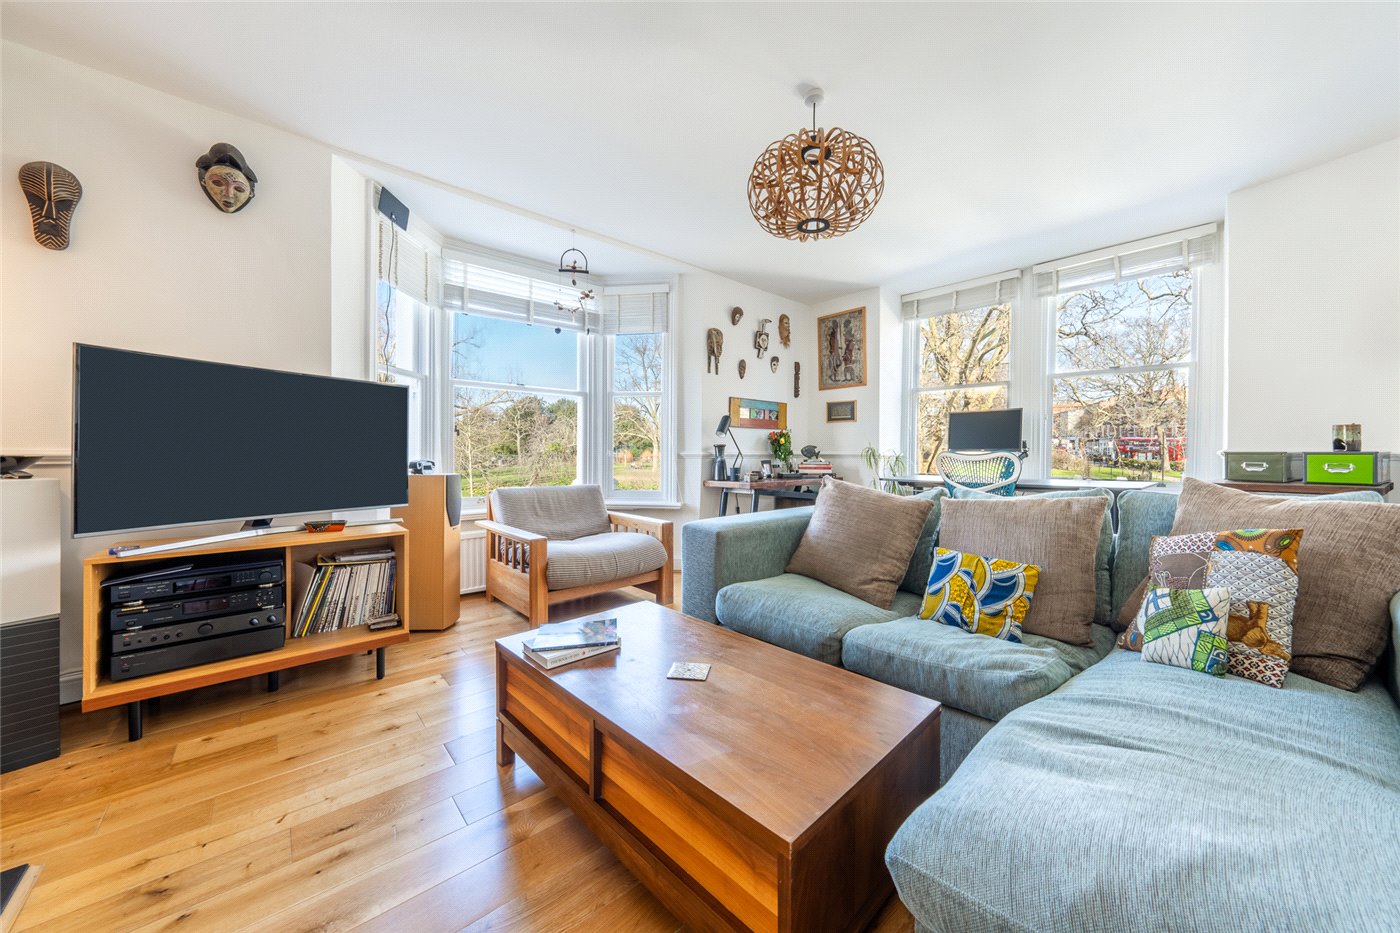 Ulysses Road, London, NW6 2 bedroom flat/apartment in London